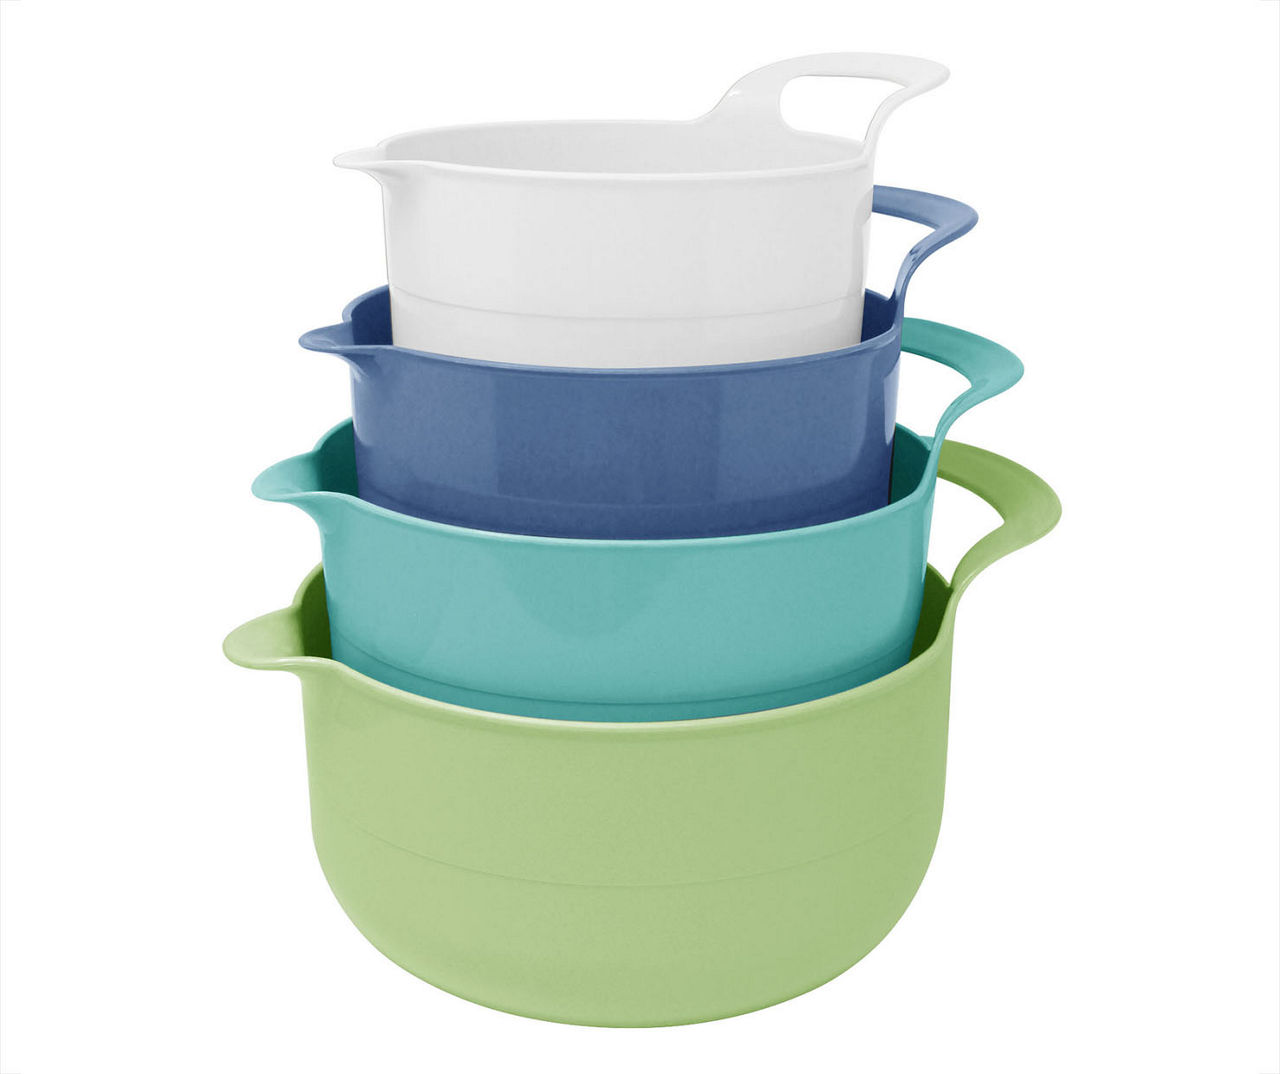 Mixing Bowls - 4 Piece Nesting Plastic Mixing Bowl Set with Pour